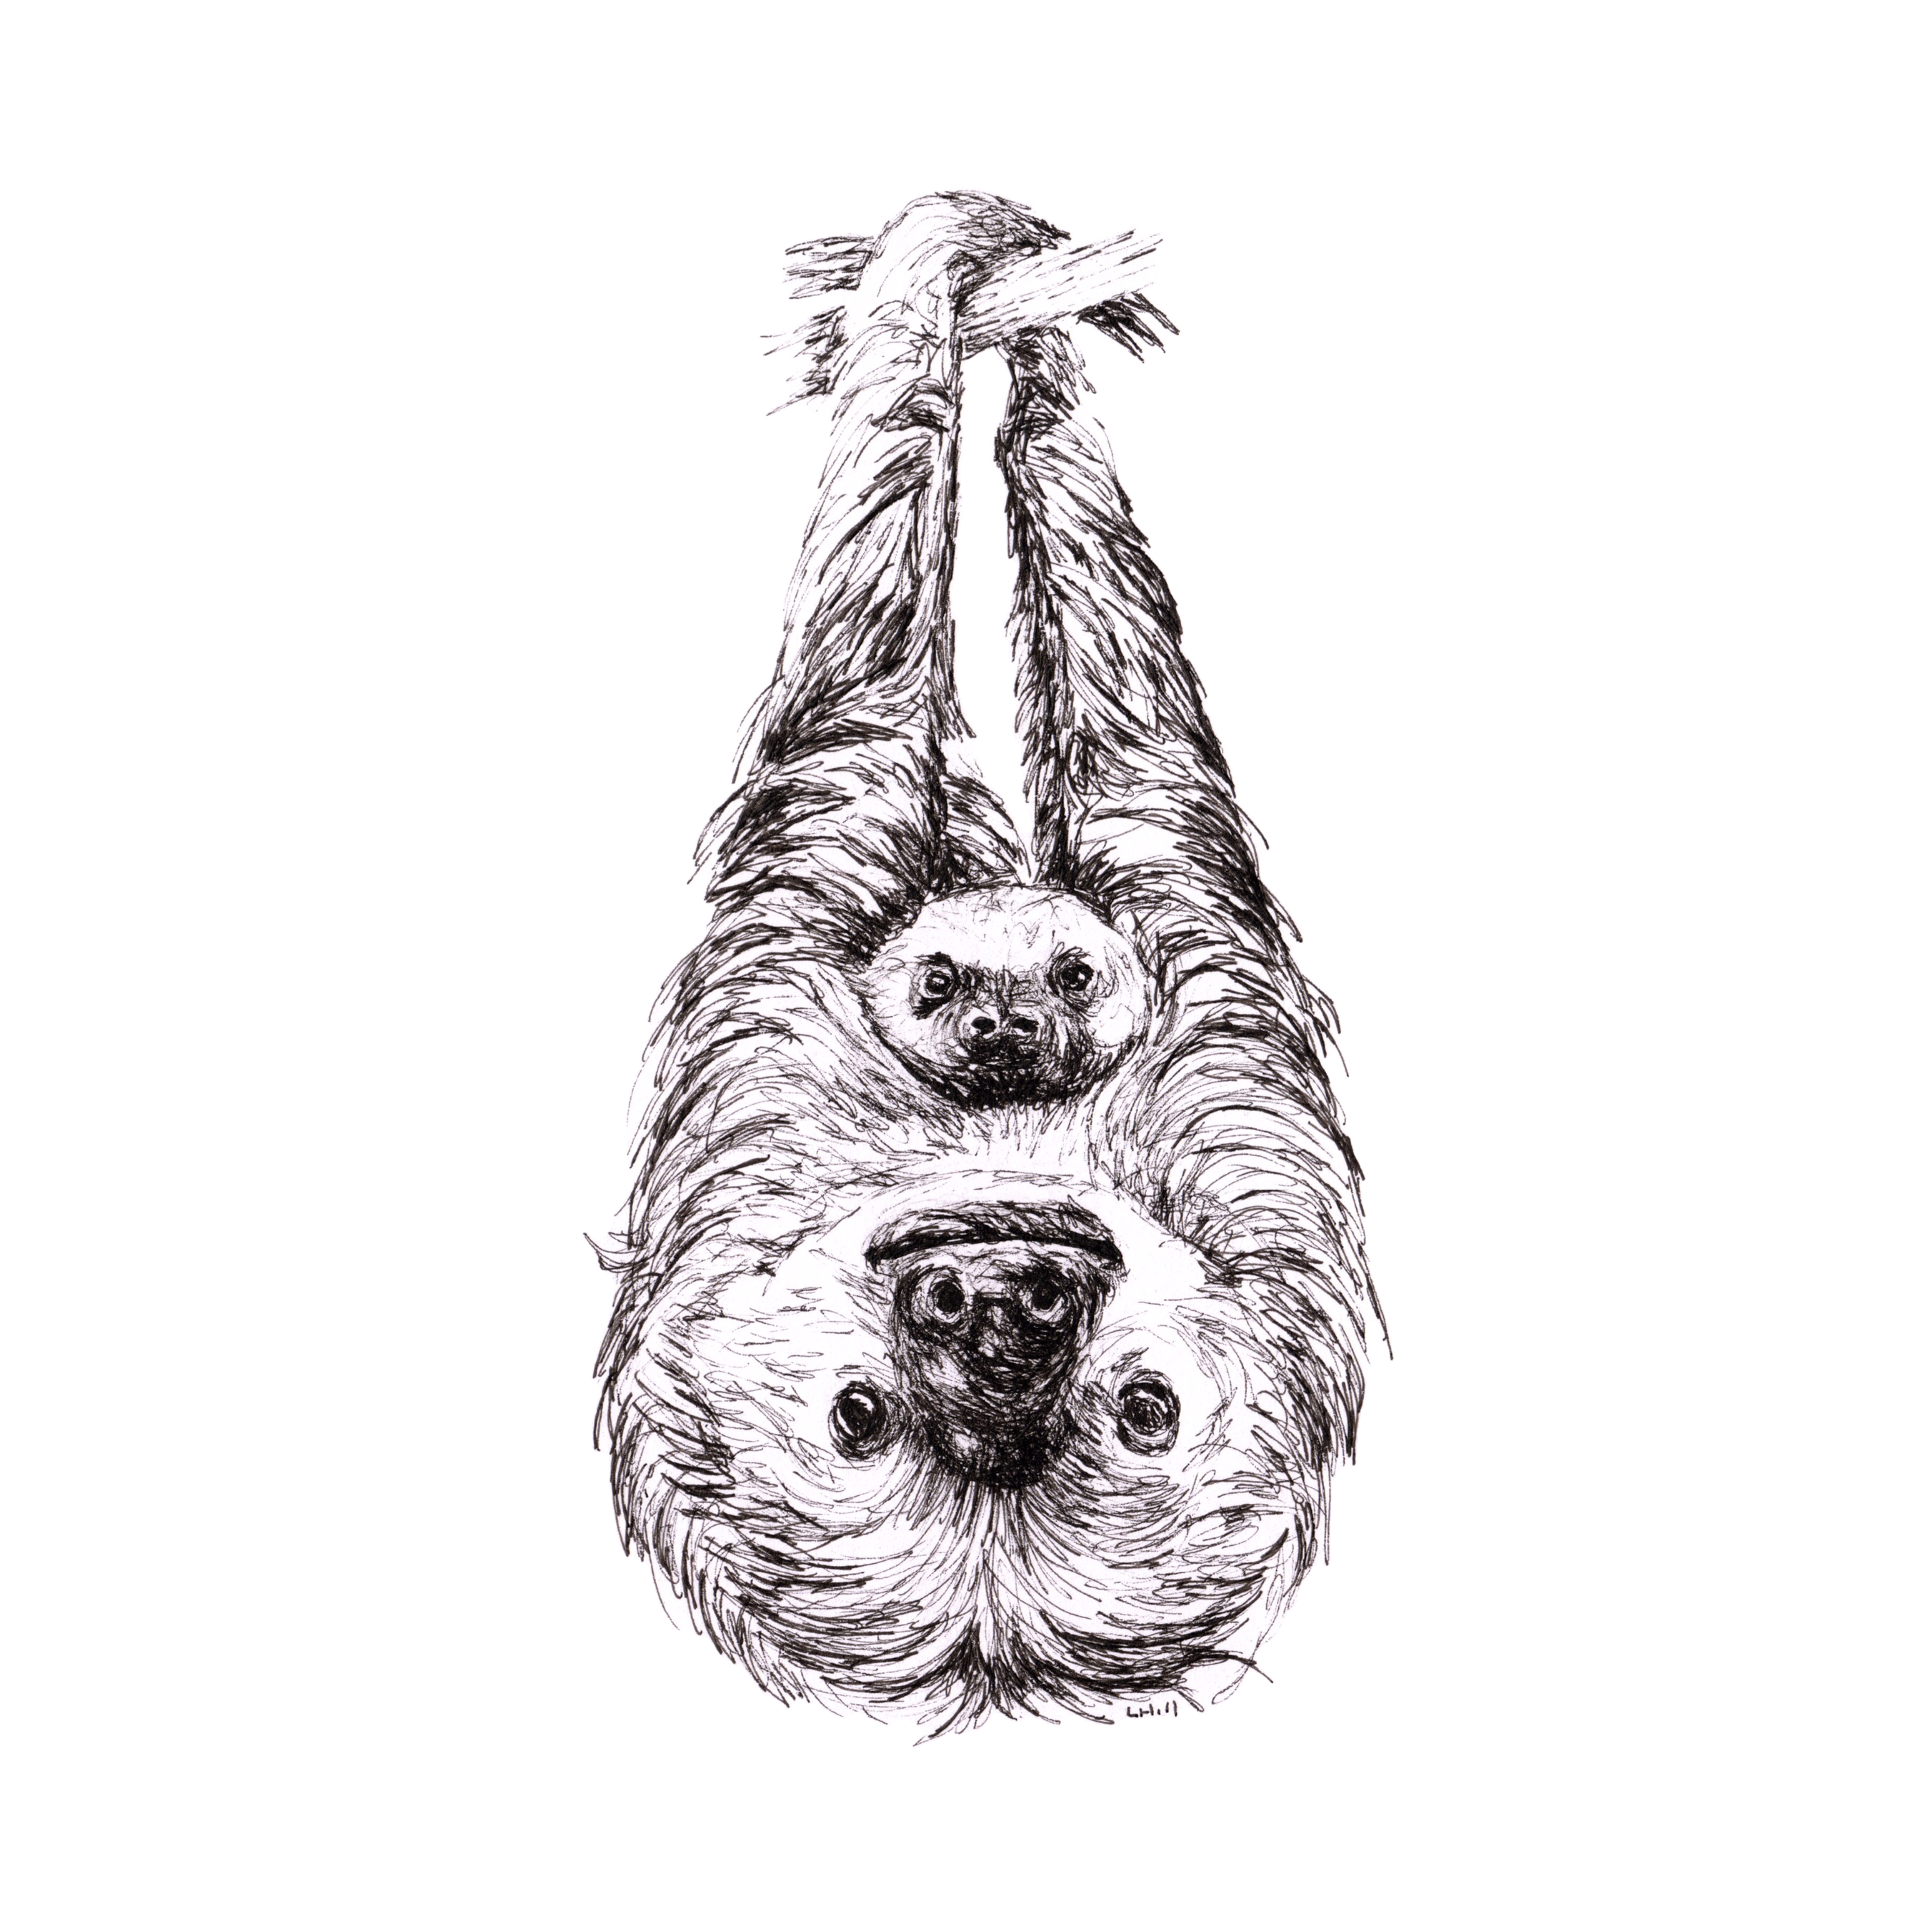 Sloth and baby pen and ink illustration by Louisa Hill